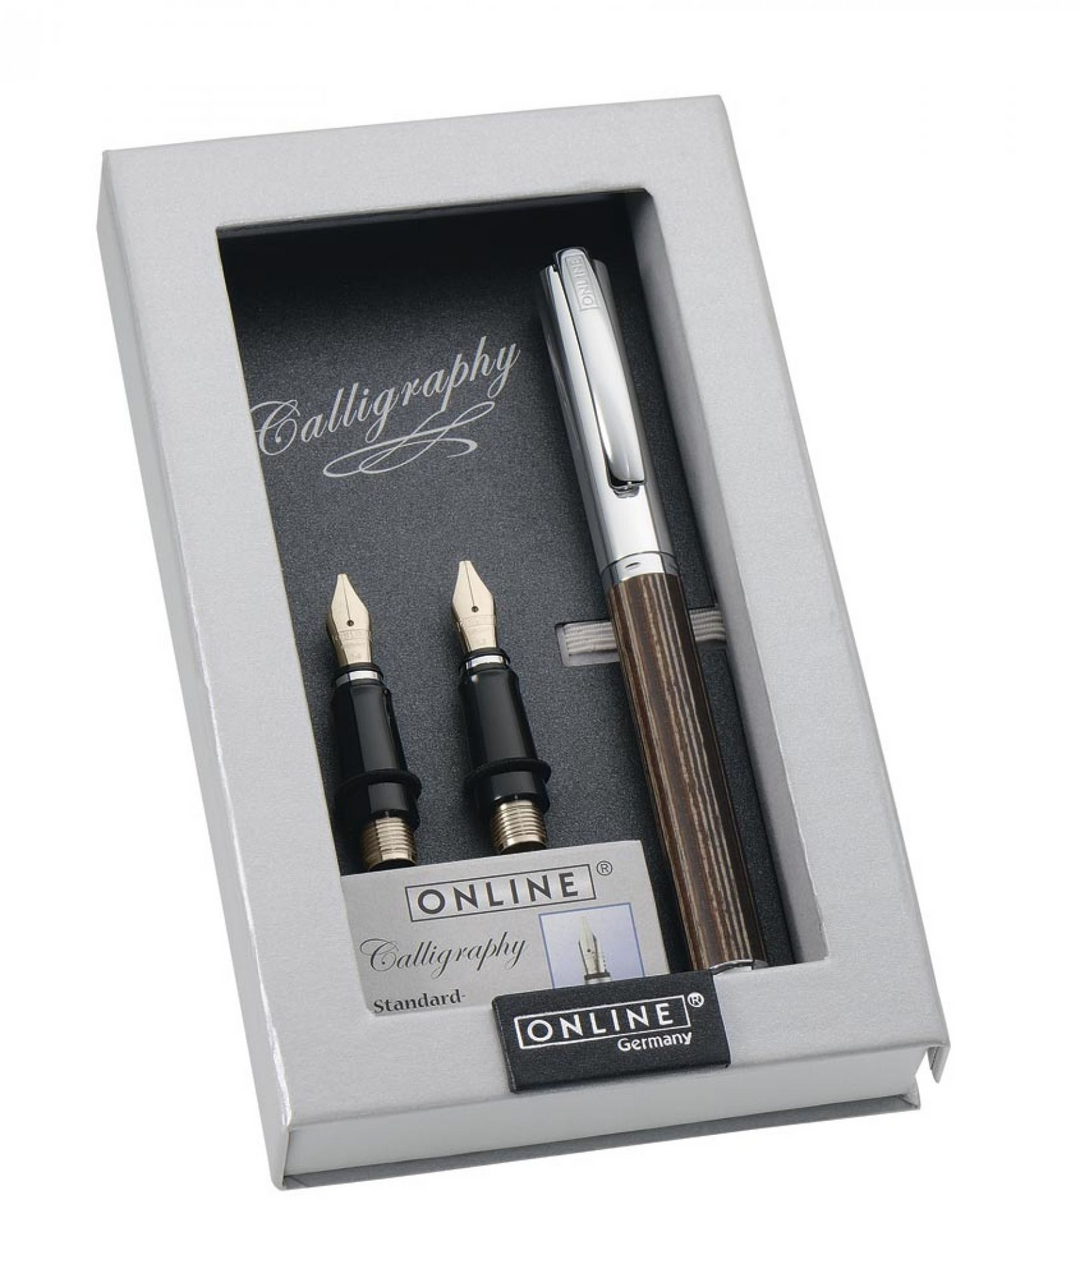 ONLINE Vision Nature Calligraphy Pen SET - WawaWood Brown Chrome Trim (3 in 1 Fountain Pen) - KSGILLS.com | The Writing Instruments Expert